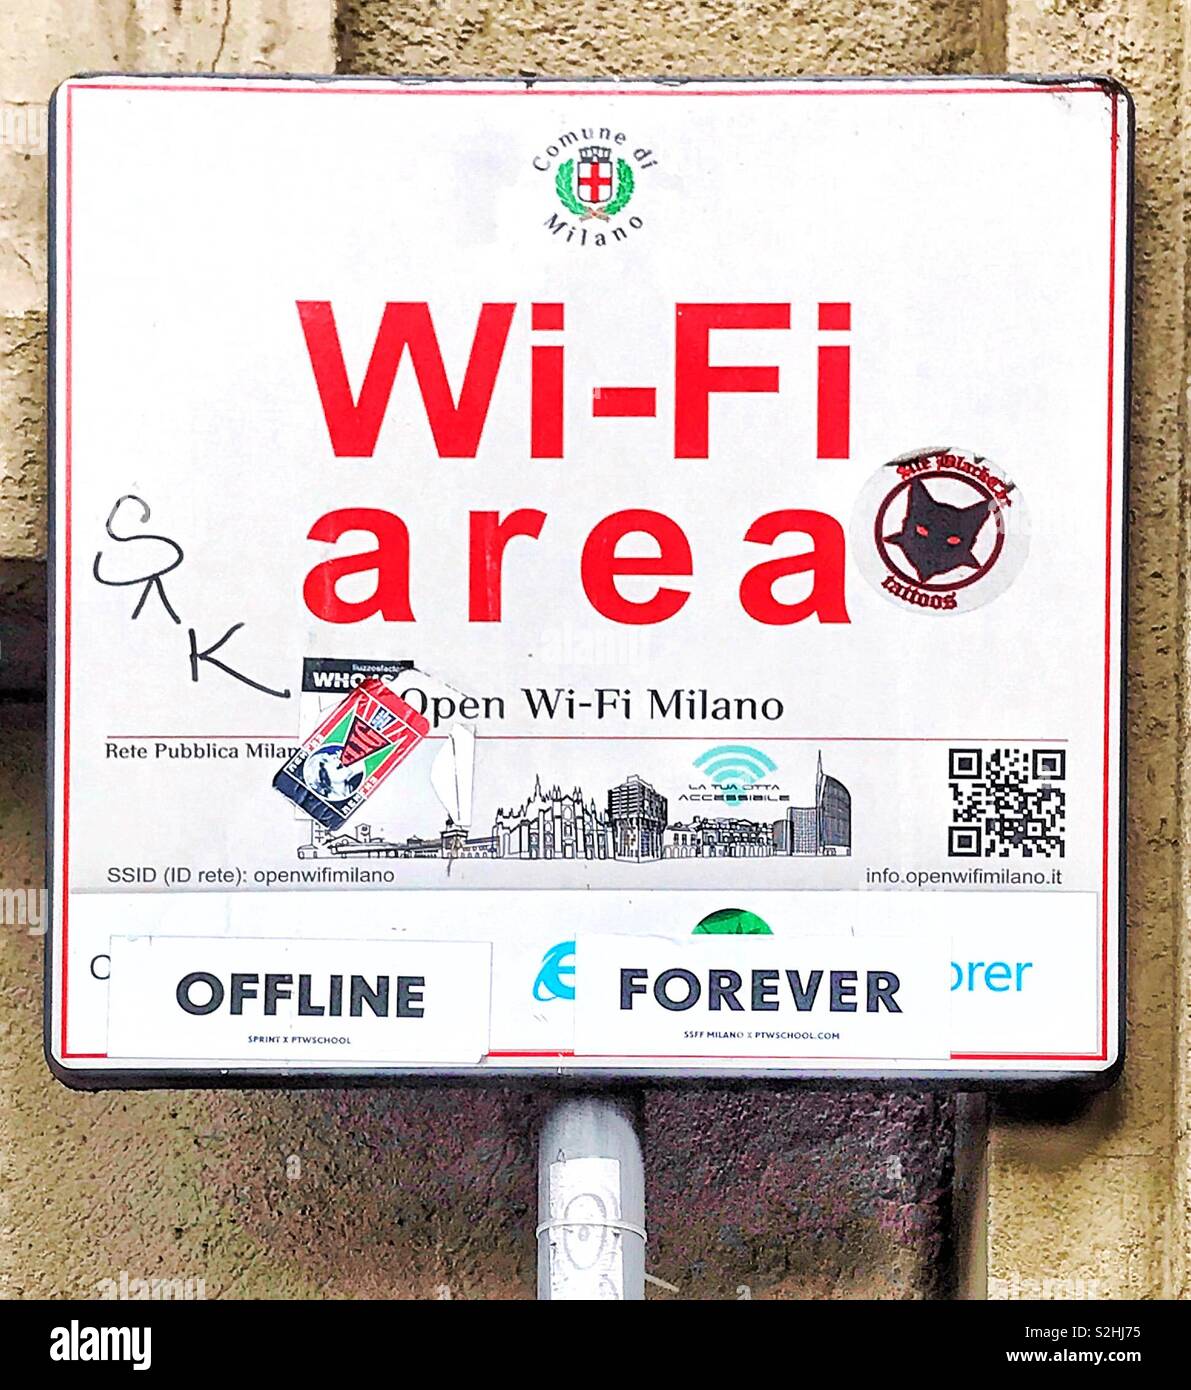 Wi-fi área sign in Milan with stickers protest stickers “offline forever” Stock Photo